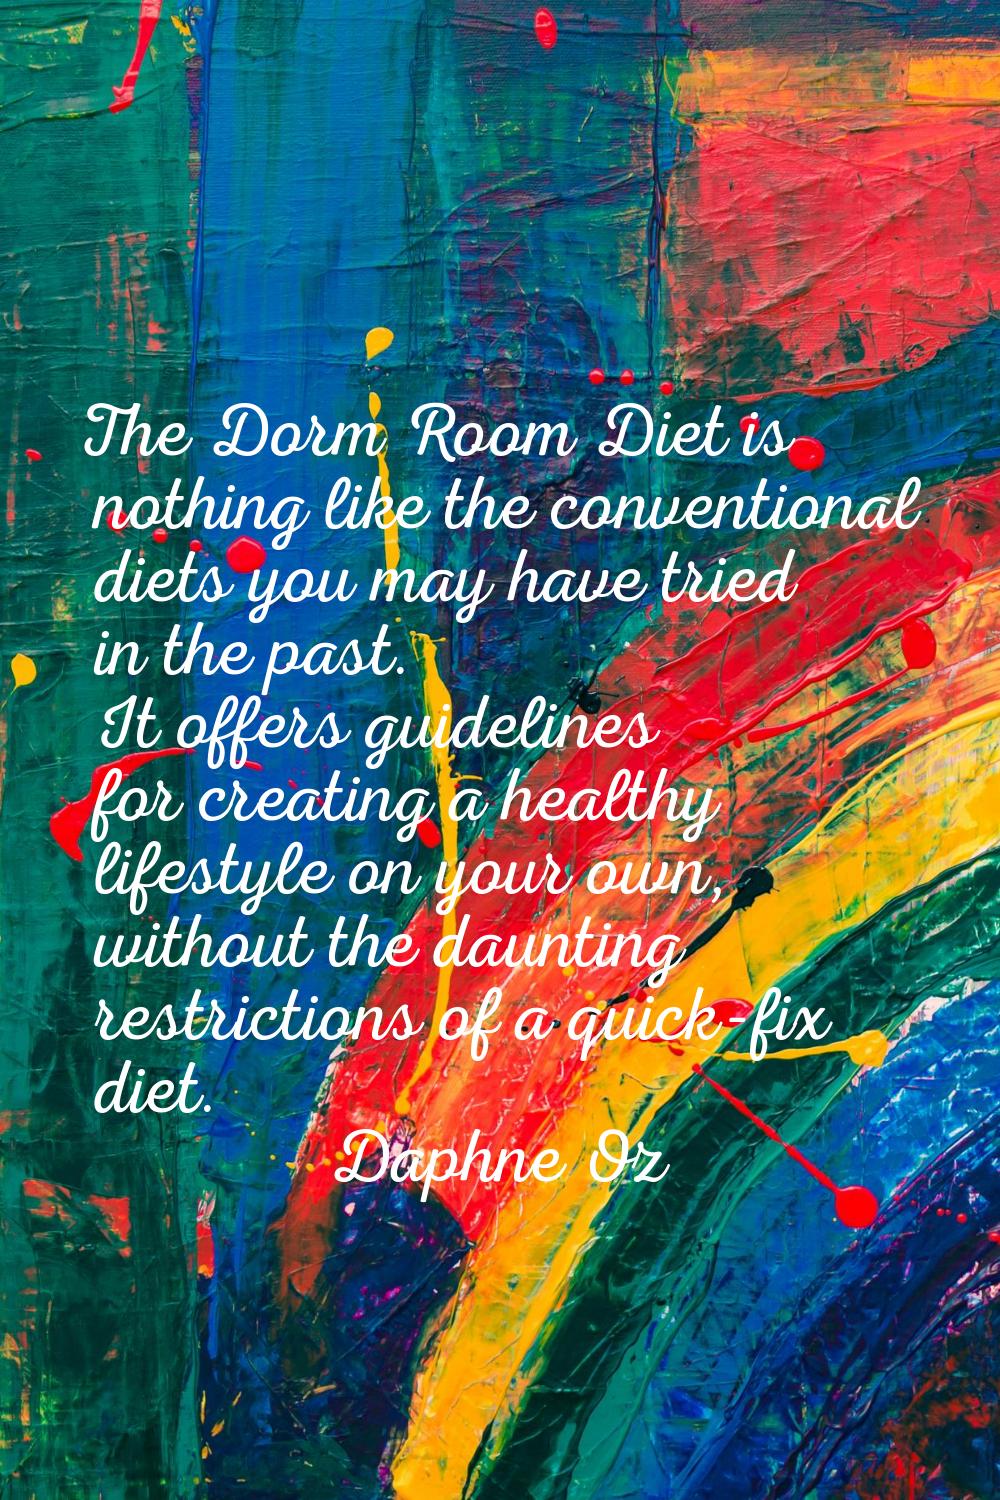 The Dorm Room Diet is nothing like the conventional diets you may have tried in the past. It offers